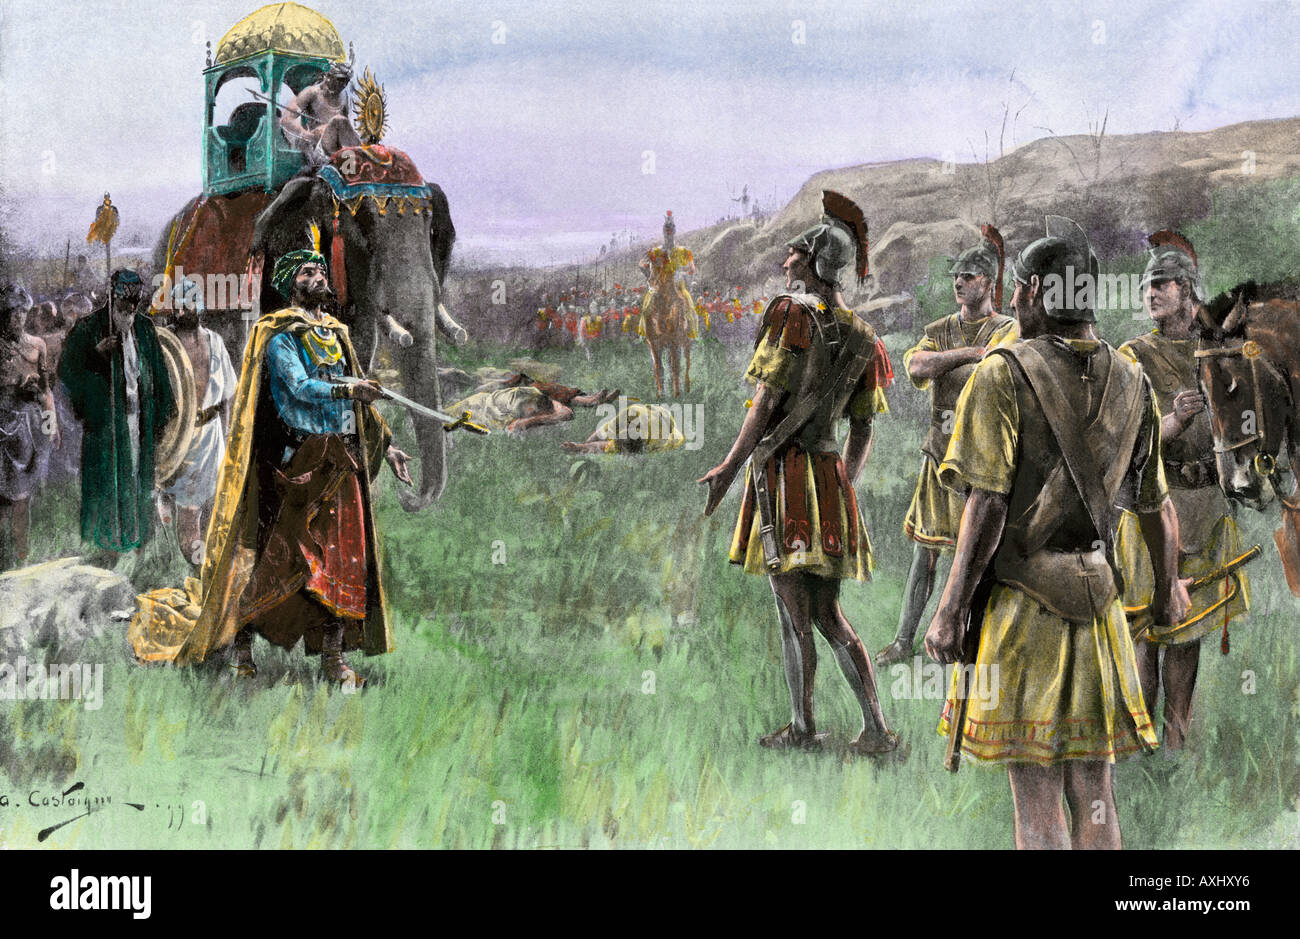 King Porus of India surrenders to Alexander the Great after the Battle of Hydaspes 326 BC. Hand-colored halftone of an illustration Stock Photo